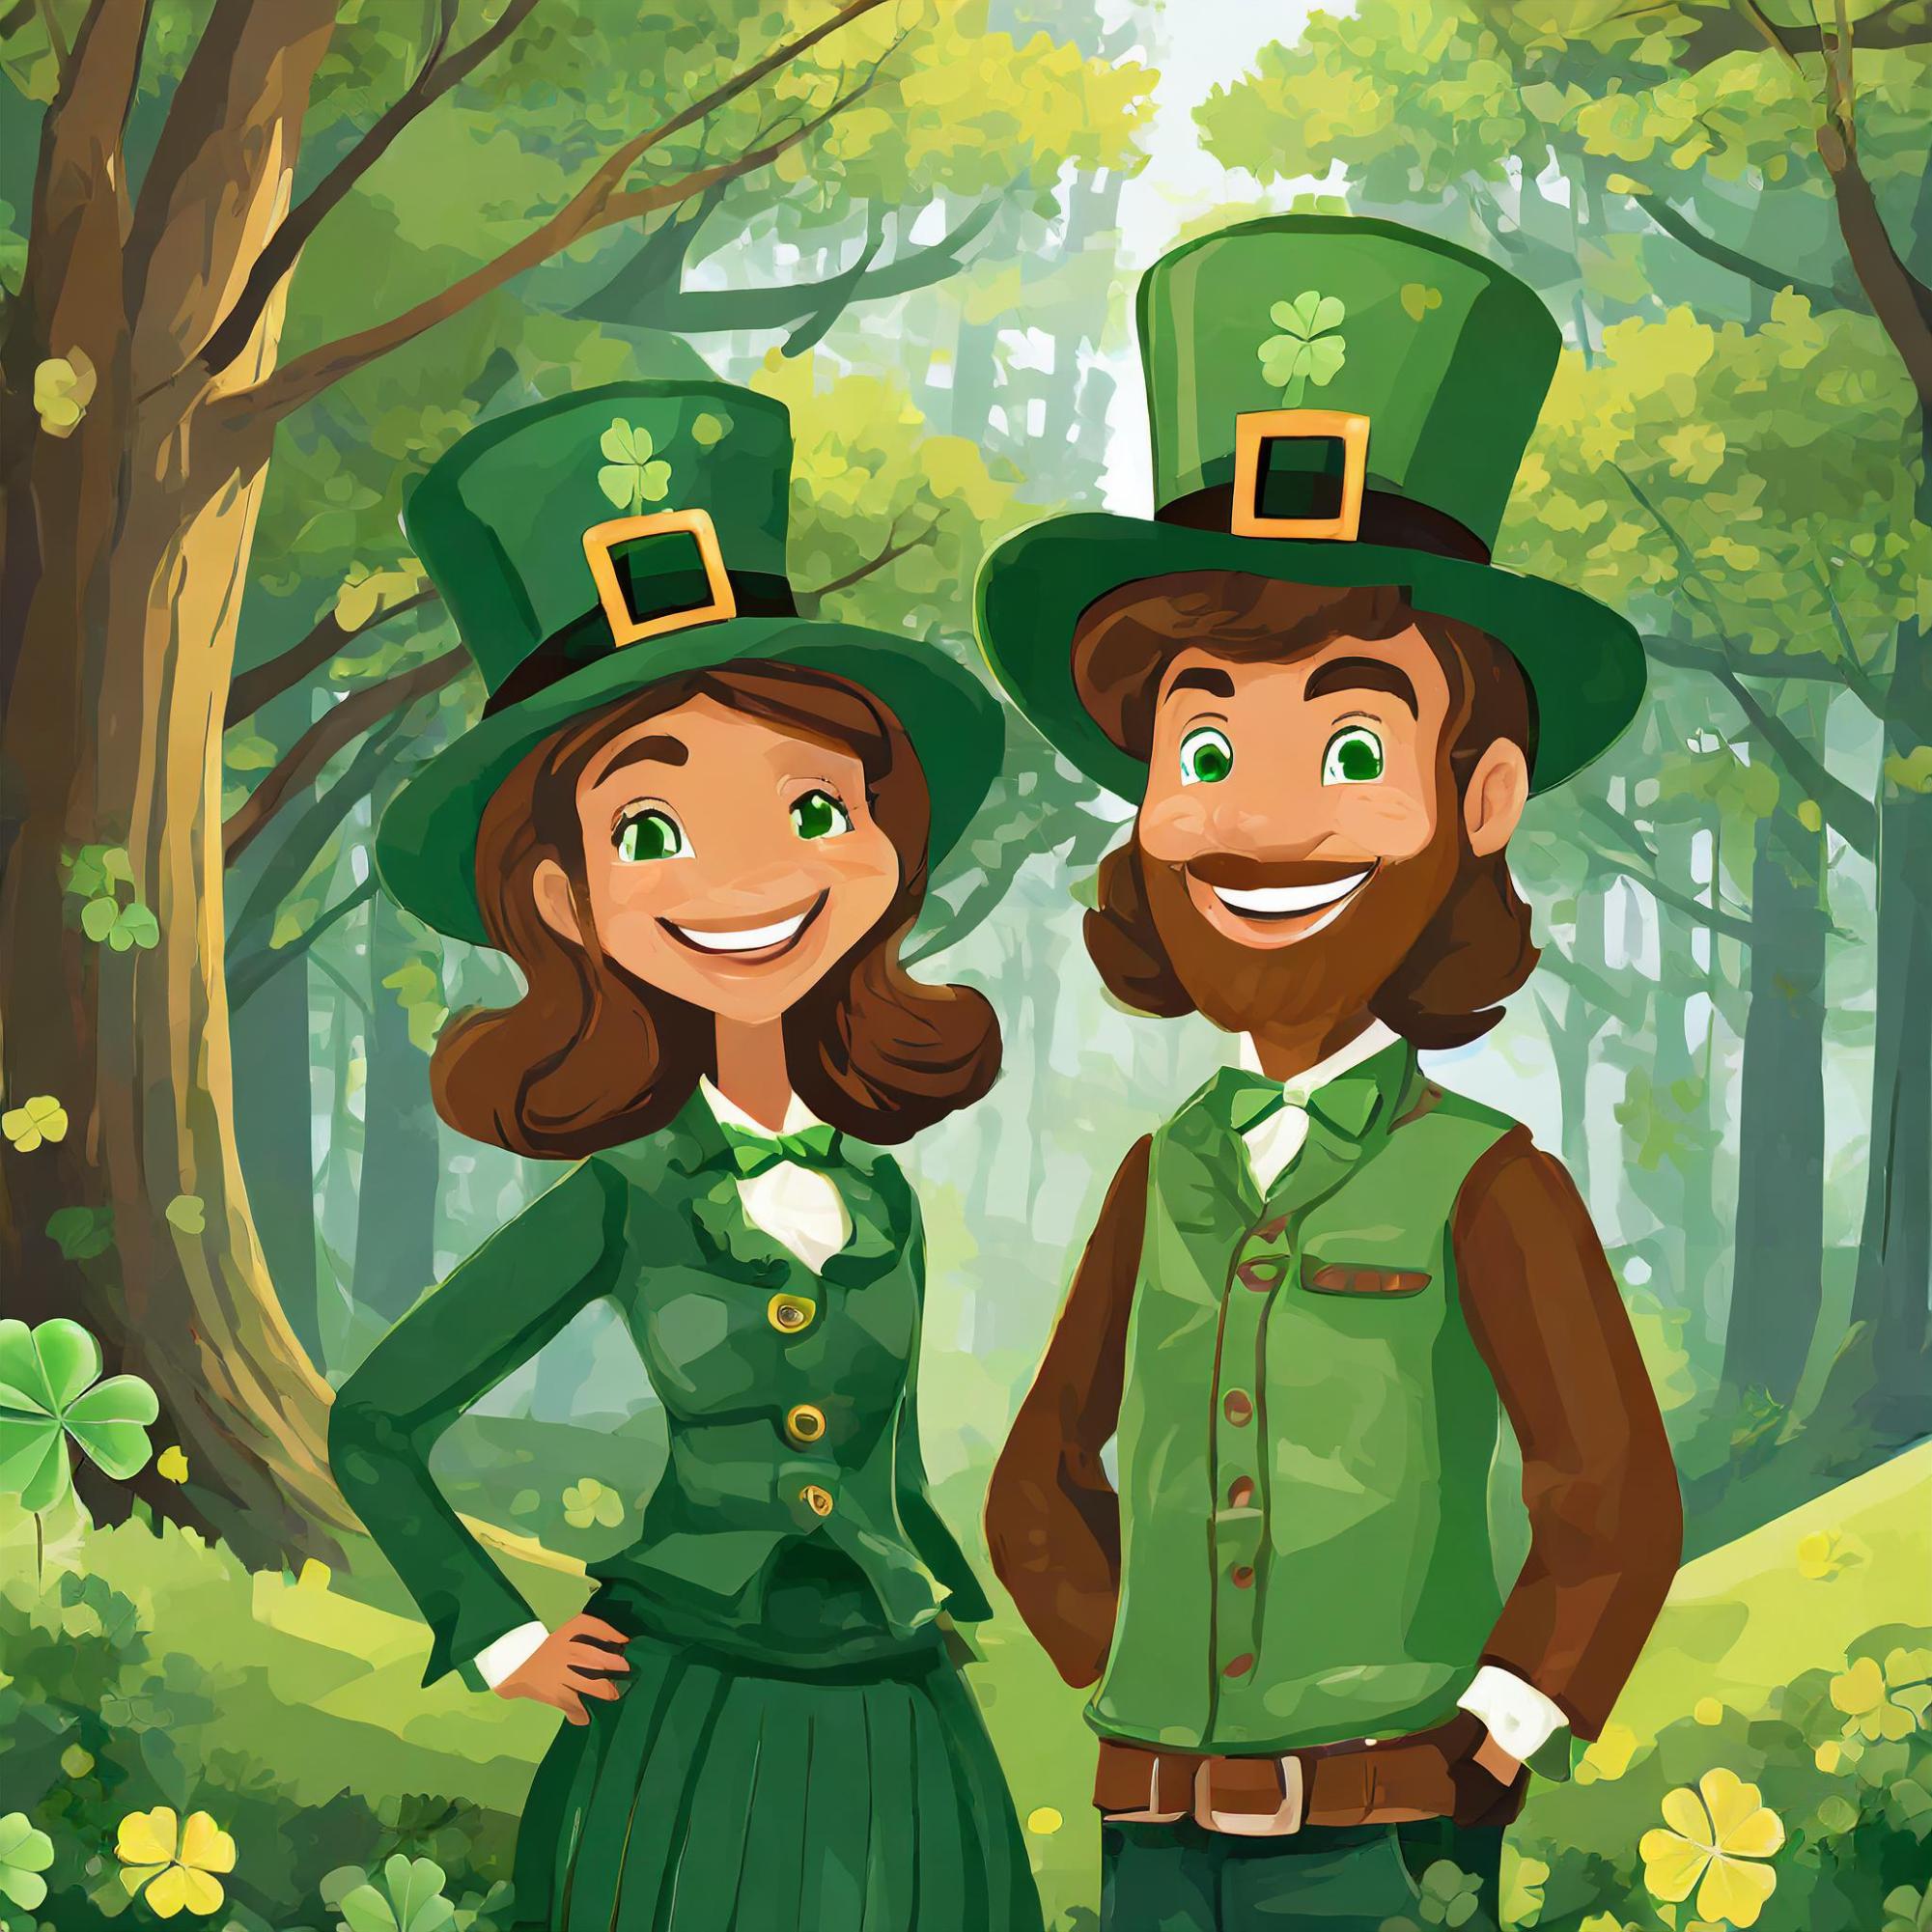 Originating from the color St. Patrick always wore, wearing green represents generational history.